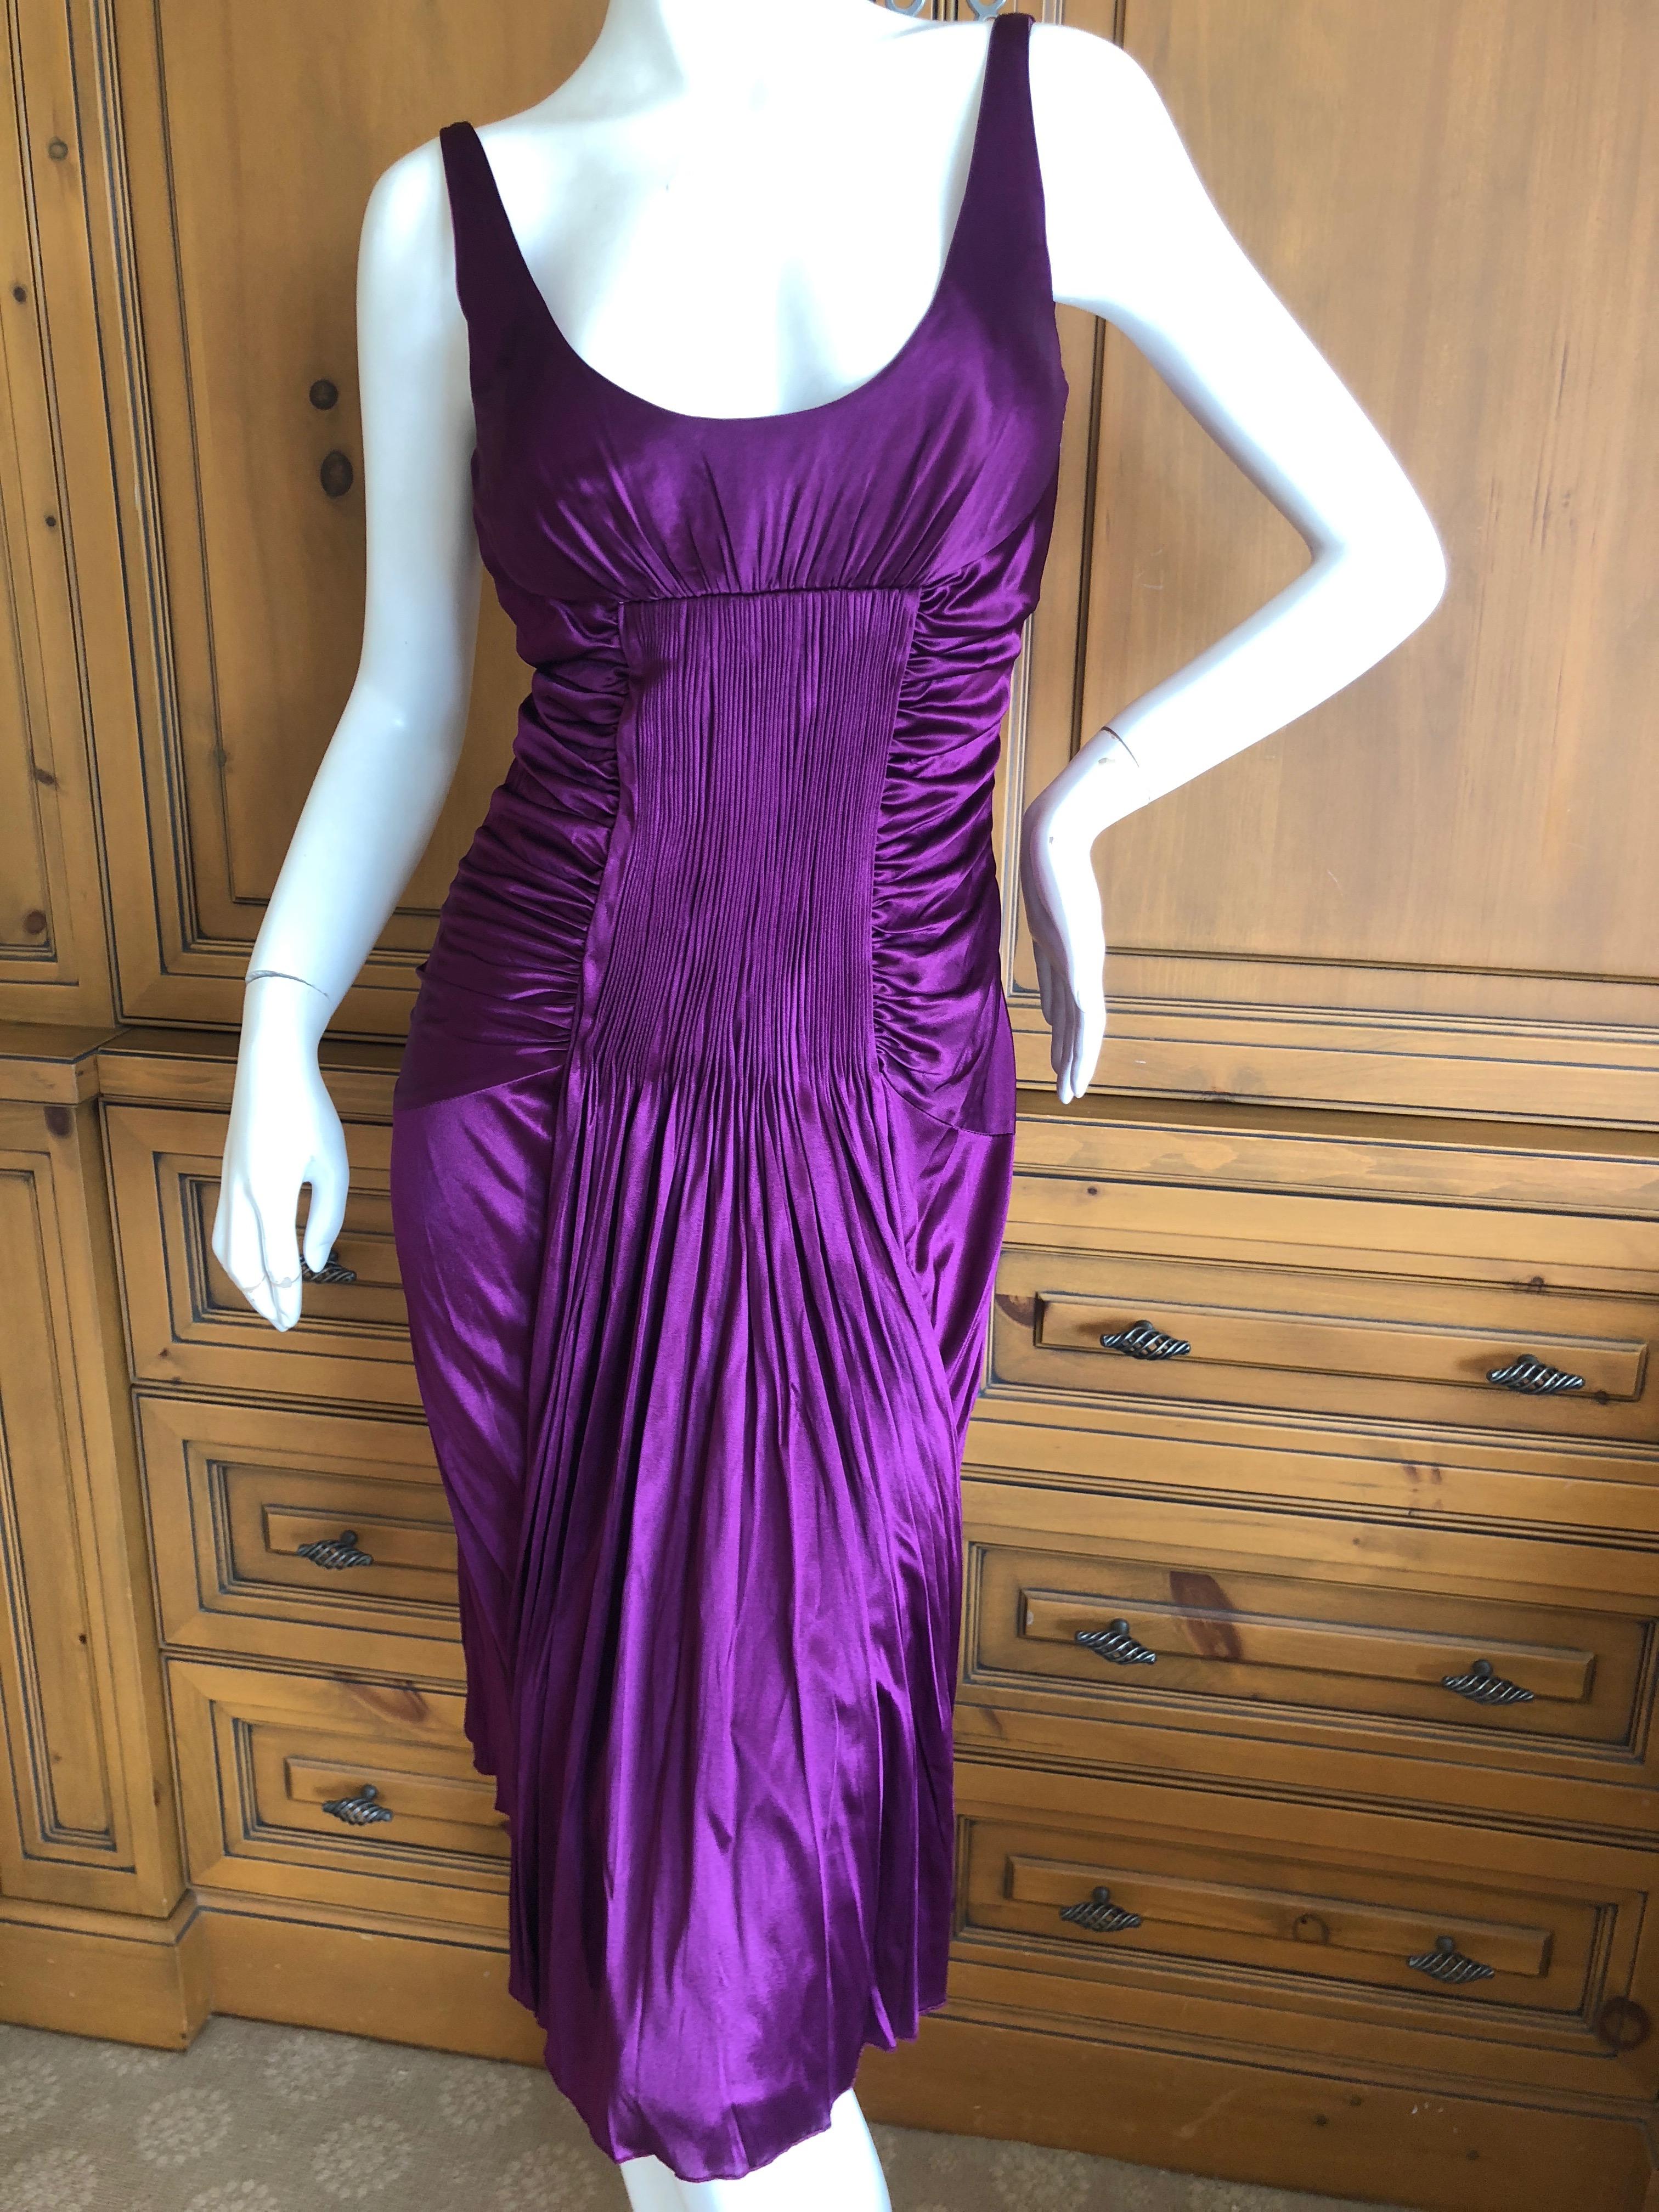 Versace Vintage Pleated Purple Jersey Low Cut Cocktail Dress with Low Cut Back
Supersexy on, this is a wonderful Versace
Size 42
Bust 36